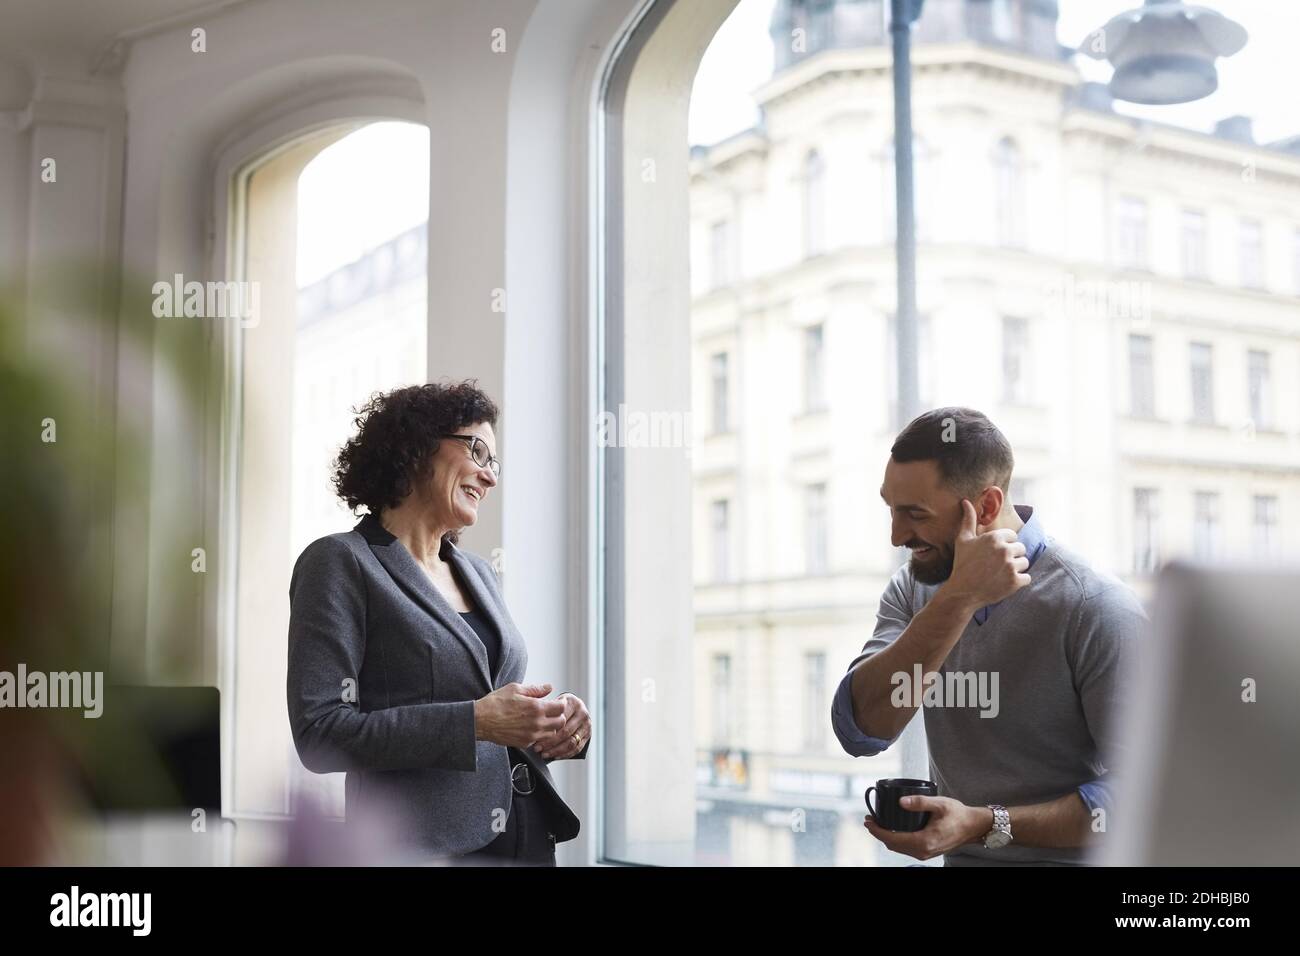 Smiling business colleagues communicating at office Stock Photo